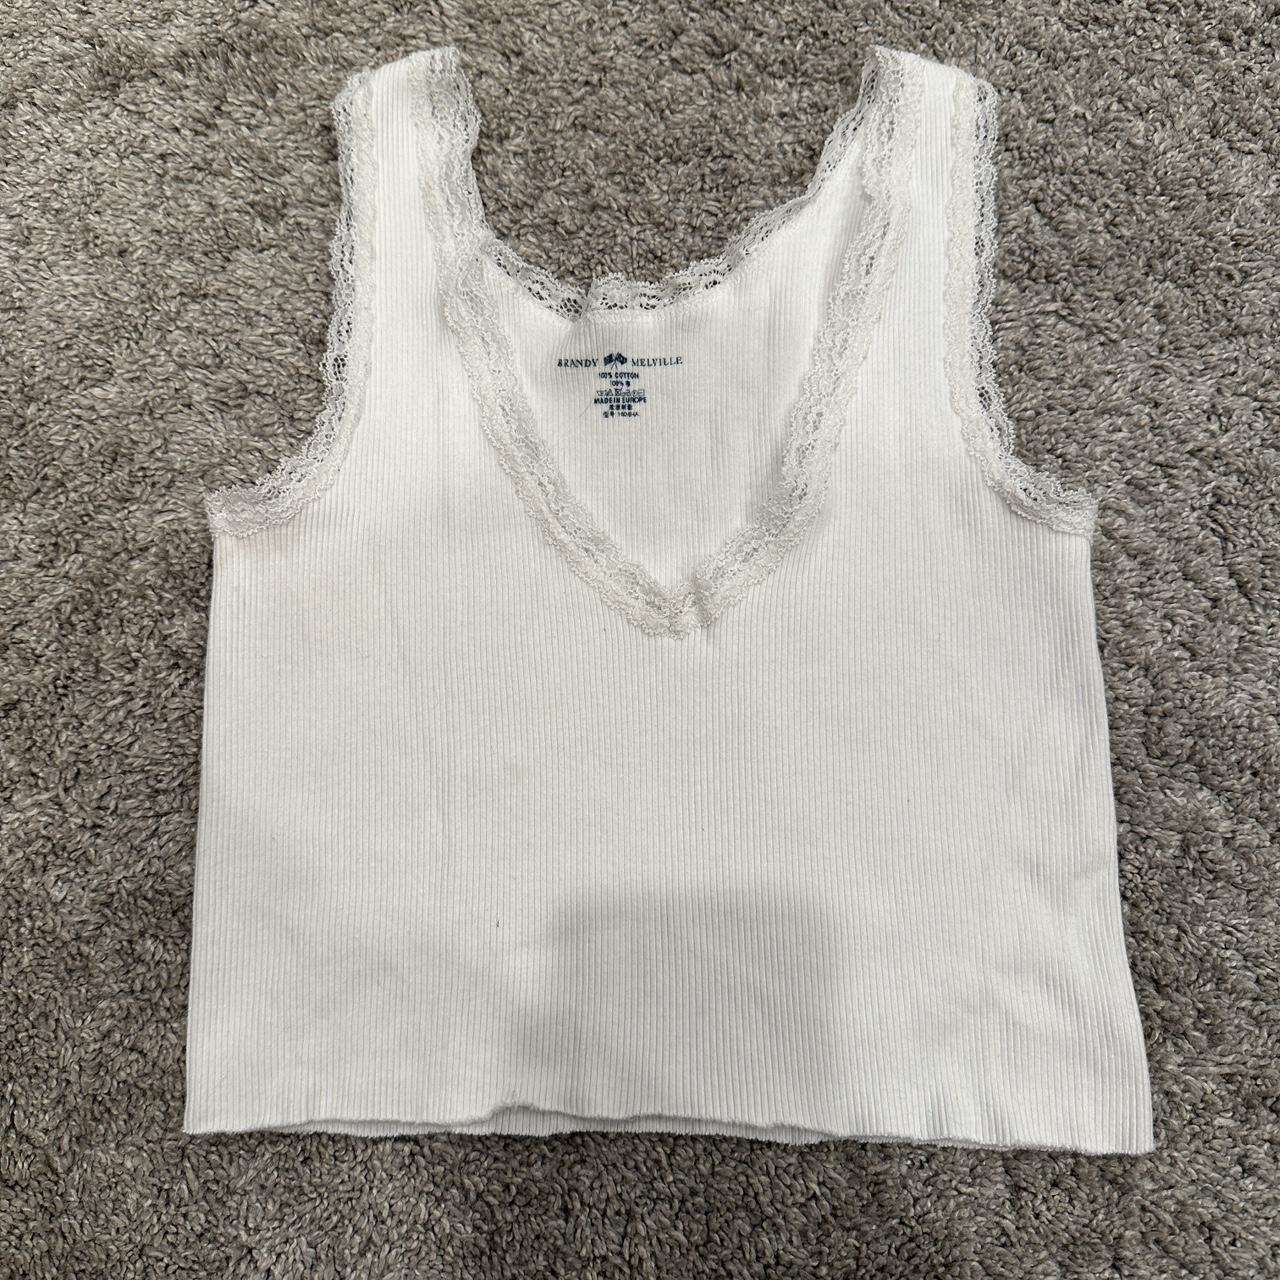 Brandy Melville white cropped scooped neck t-shirt lace trim one size